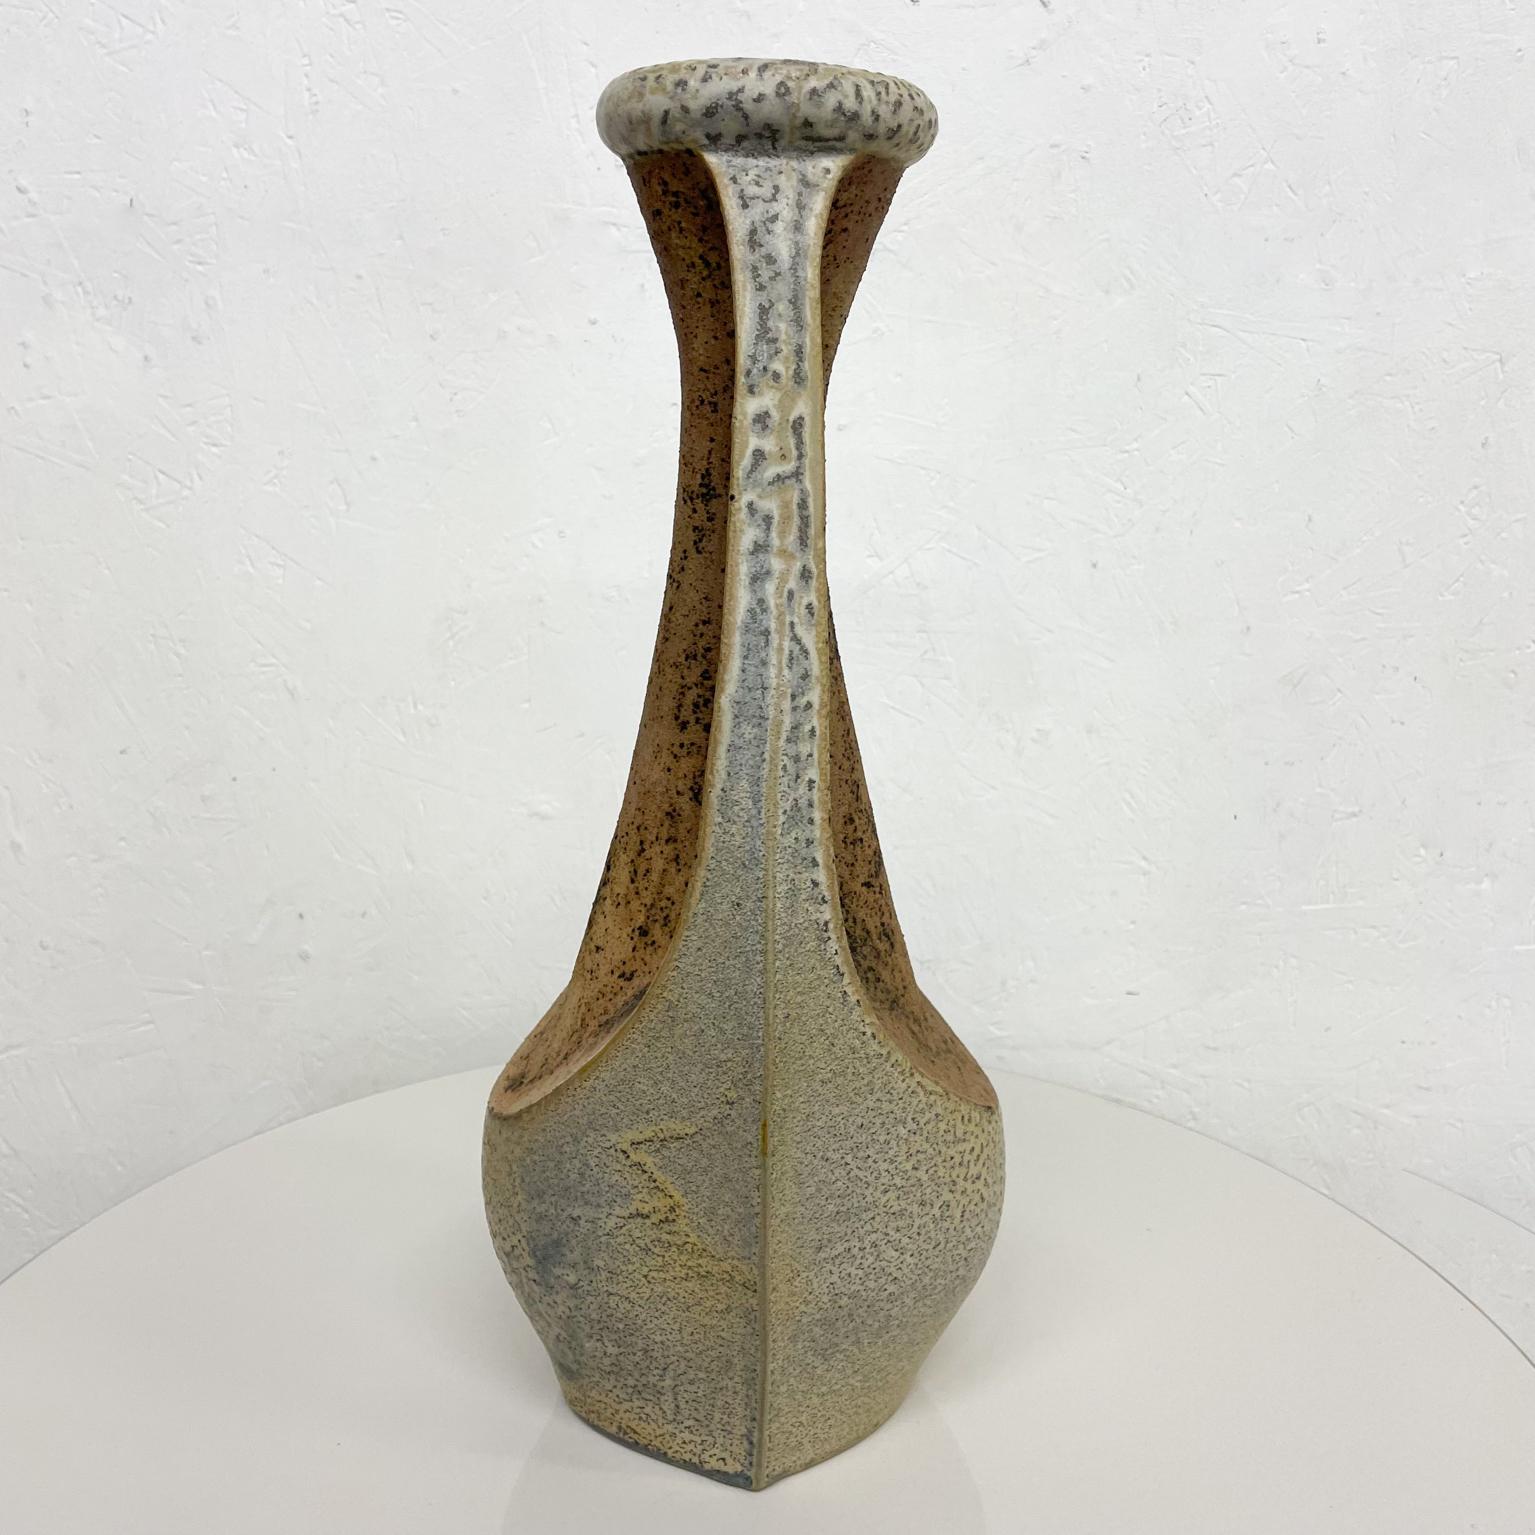 Speckled Pottery Sculptural Modernist Vase by Chico Ribeiro Munoz Brazil In Good Condition For Sale In Chula Vista, CA